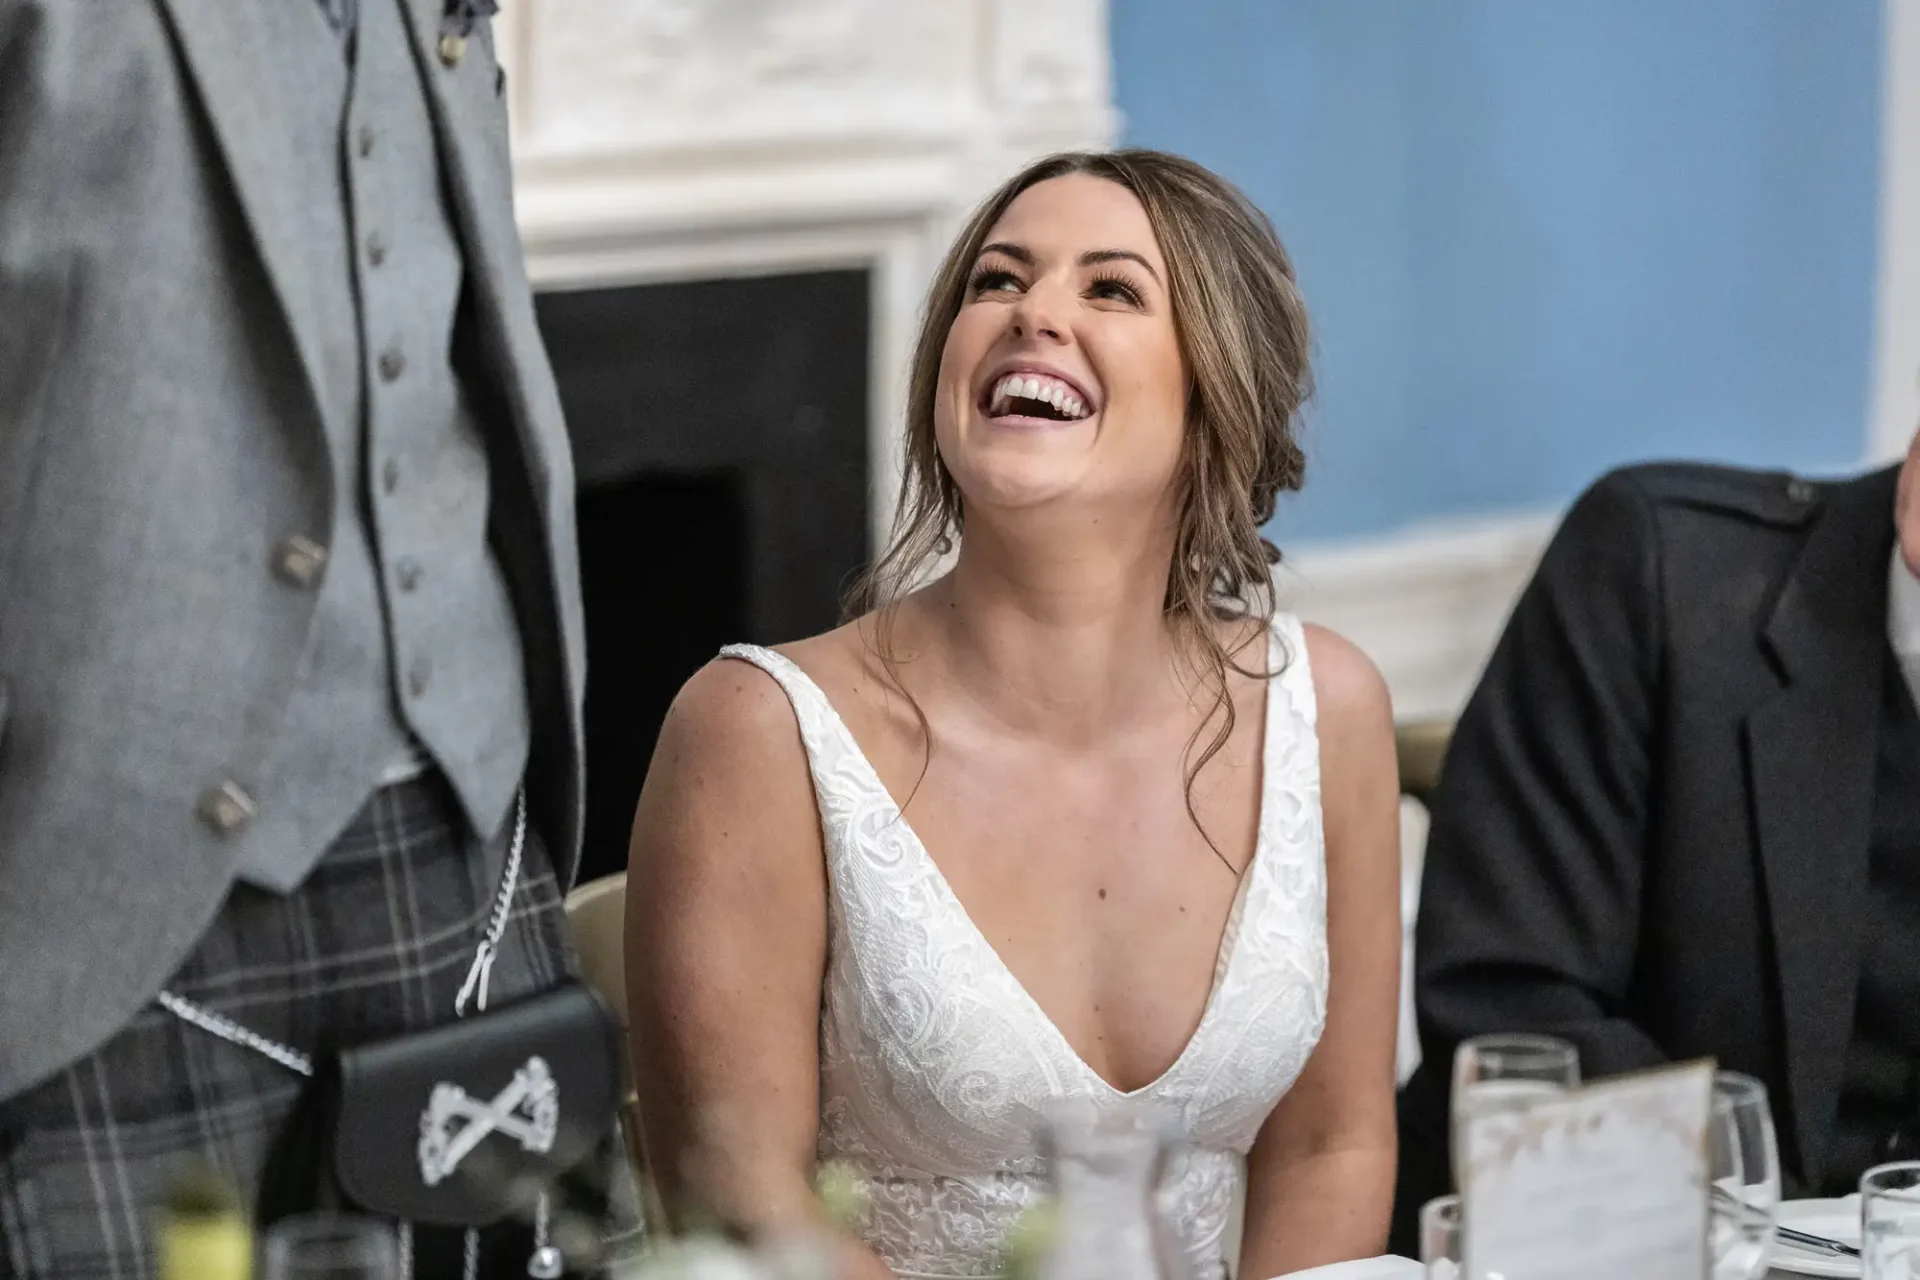 A joyful bride laughing at a wedding reception, surrounded by guests in formal attire.